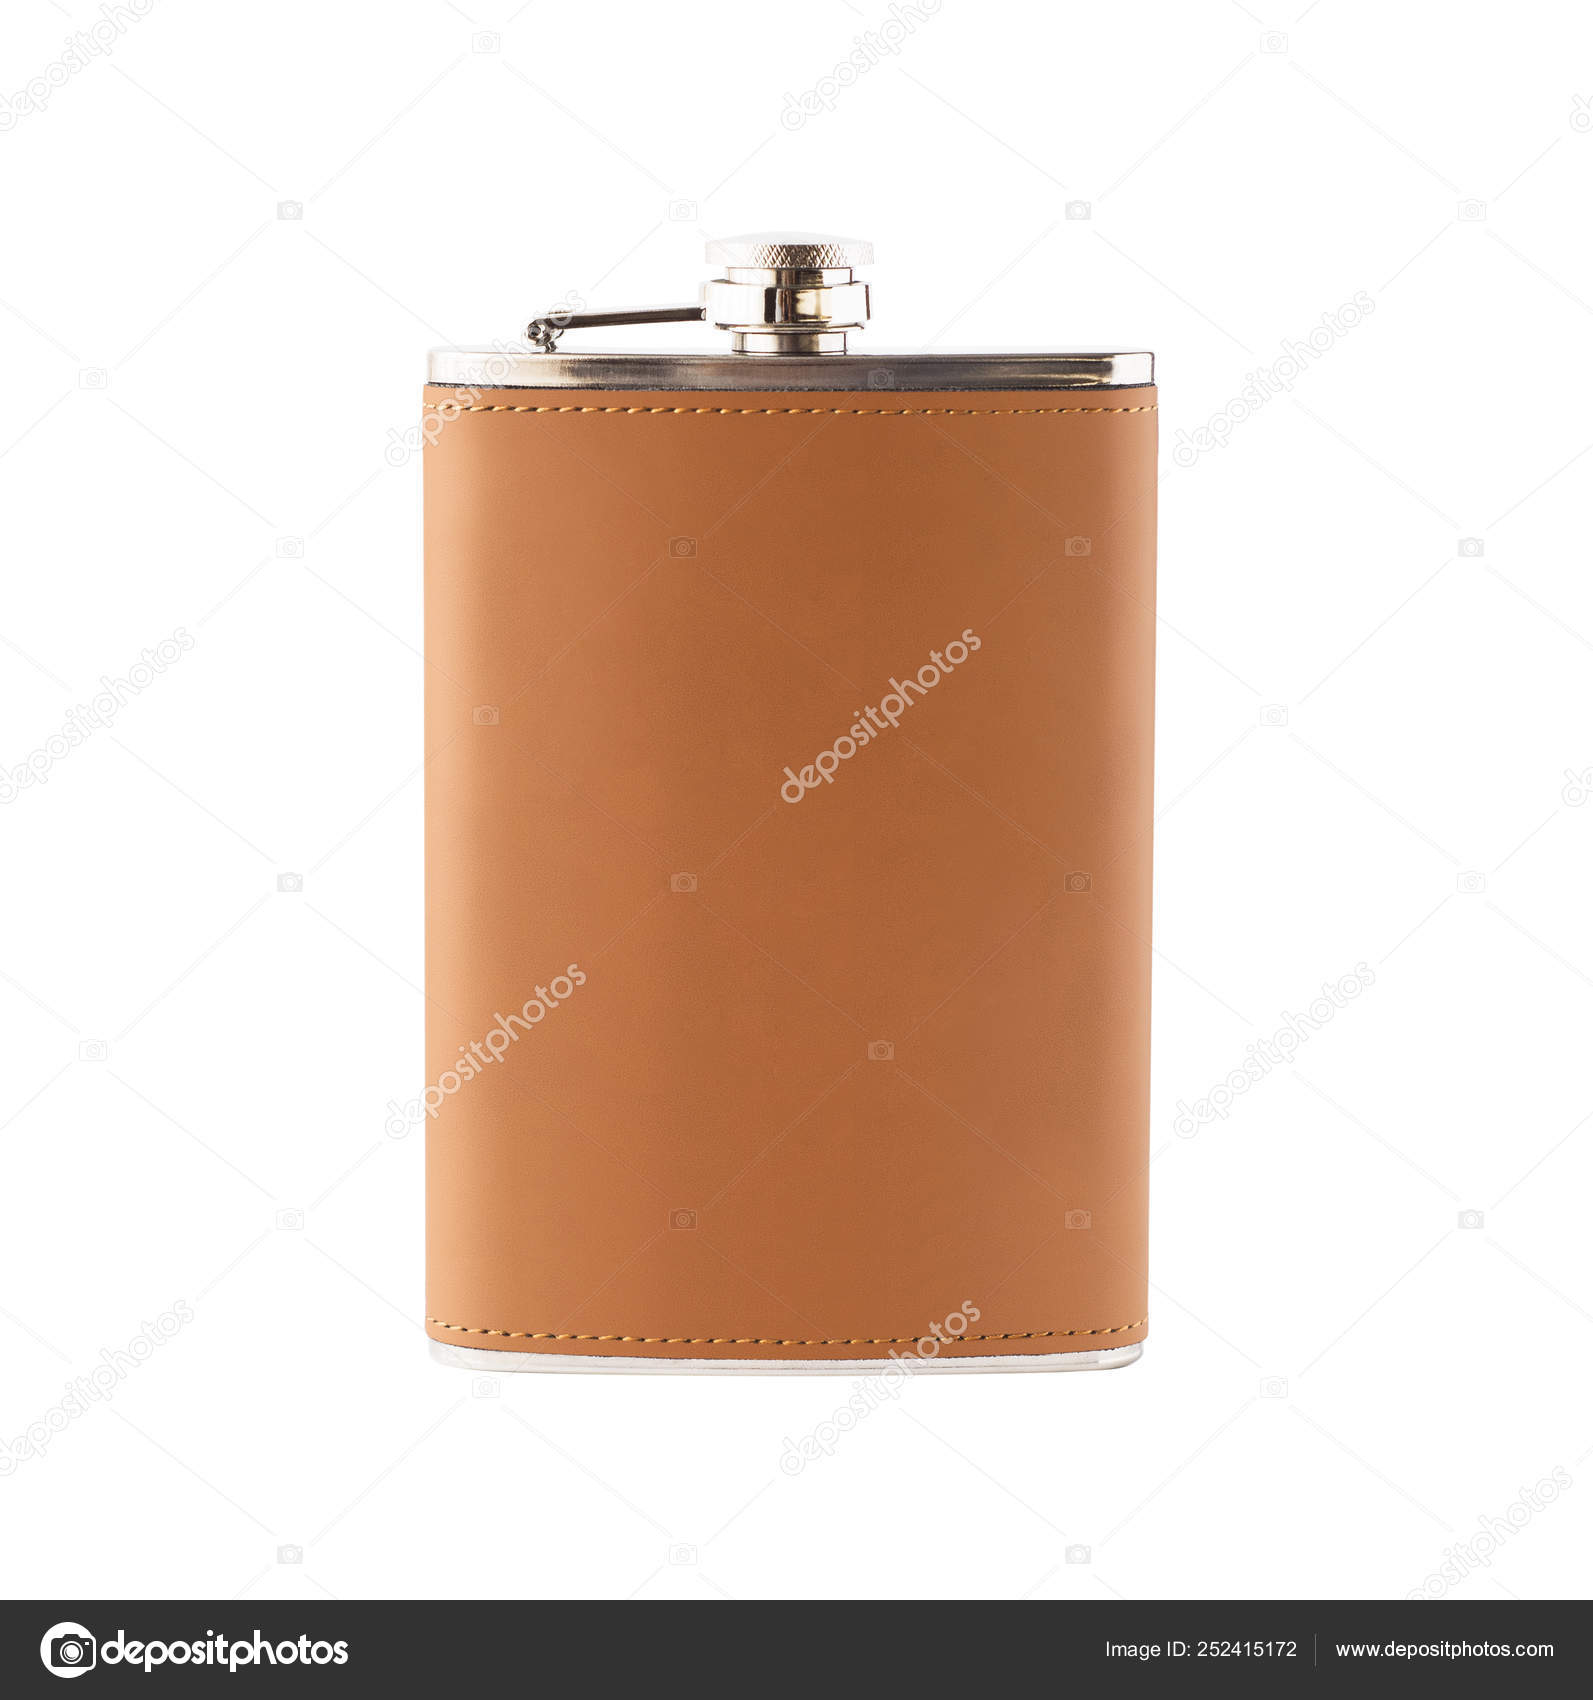 Download Mockup Of Leather Hip Flask For Alcoholic Drinks Isolated On White Background Stock Photo Image By C Lilkin 252415172